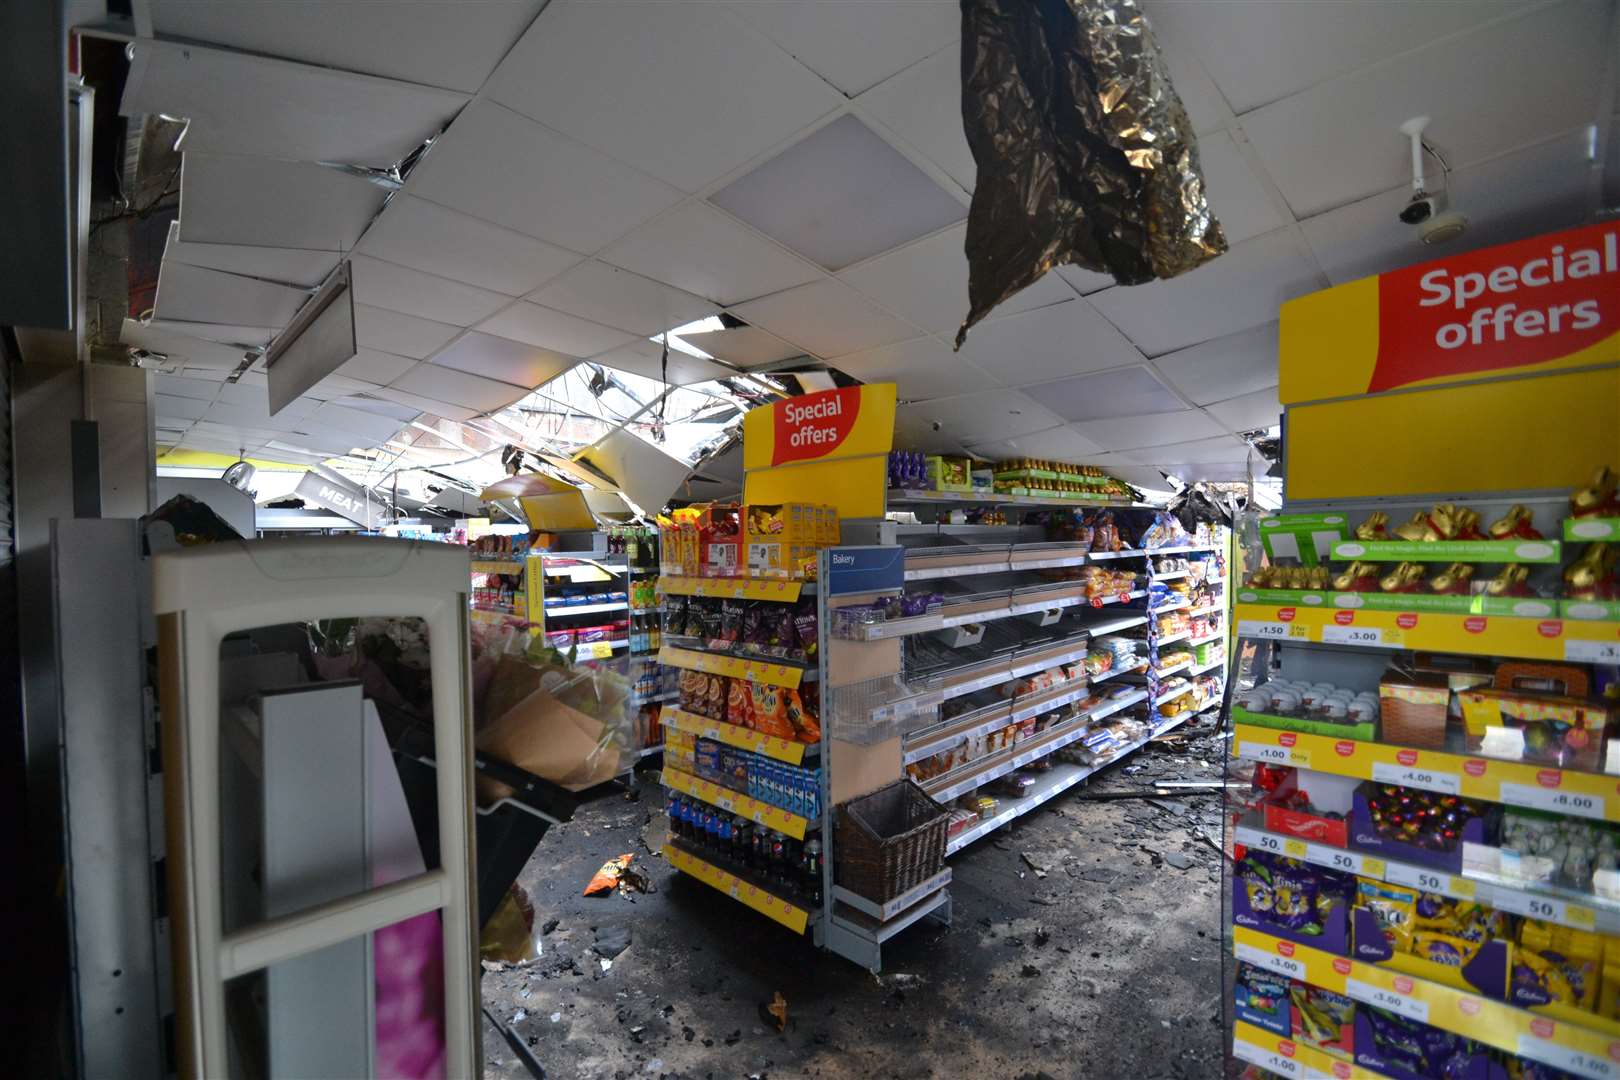 The full extent of the fire damage is seen in this interior picture of the wrecked Tesco Express store in Mace Lane, Ashford Picture: Steve Salter